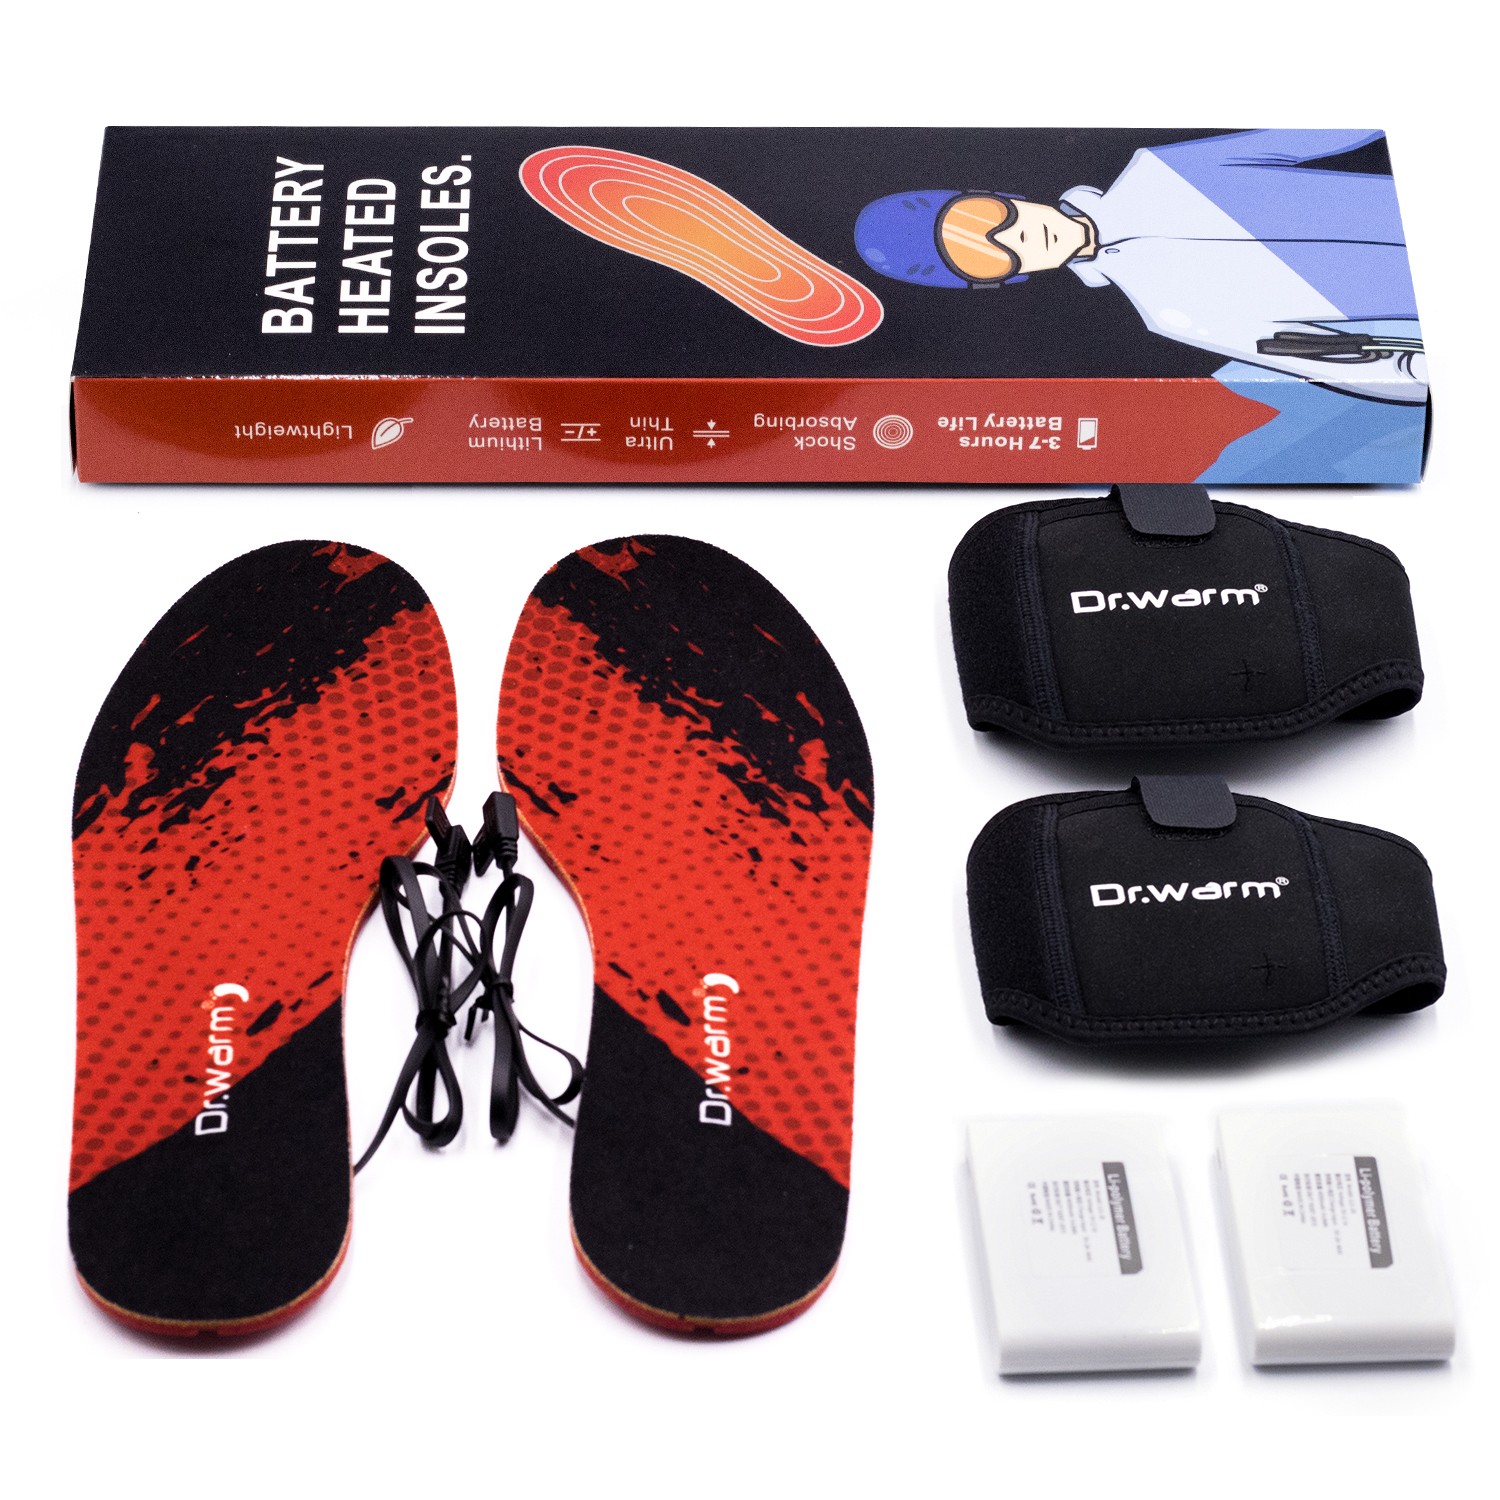 Dr. Warm heated foot insoles-22